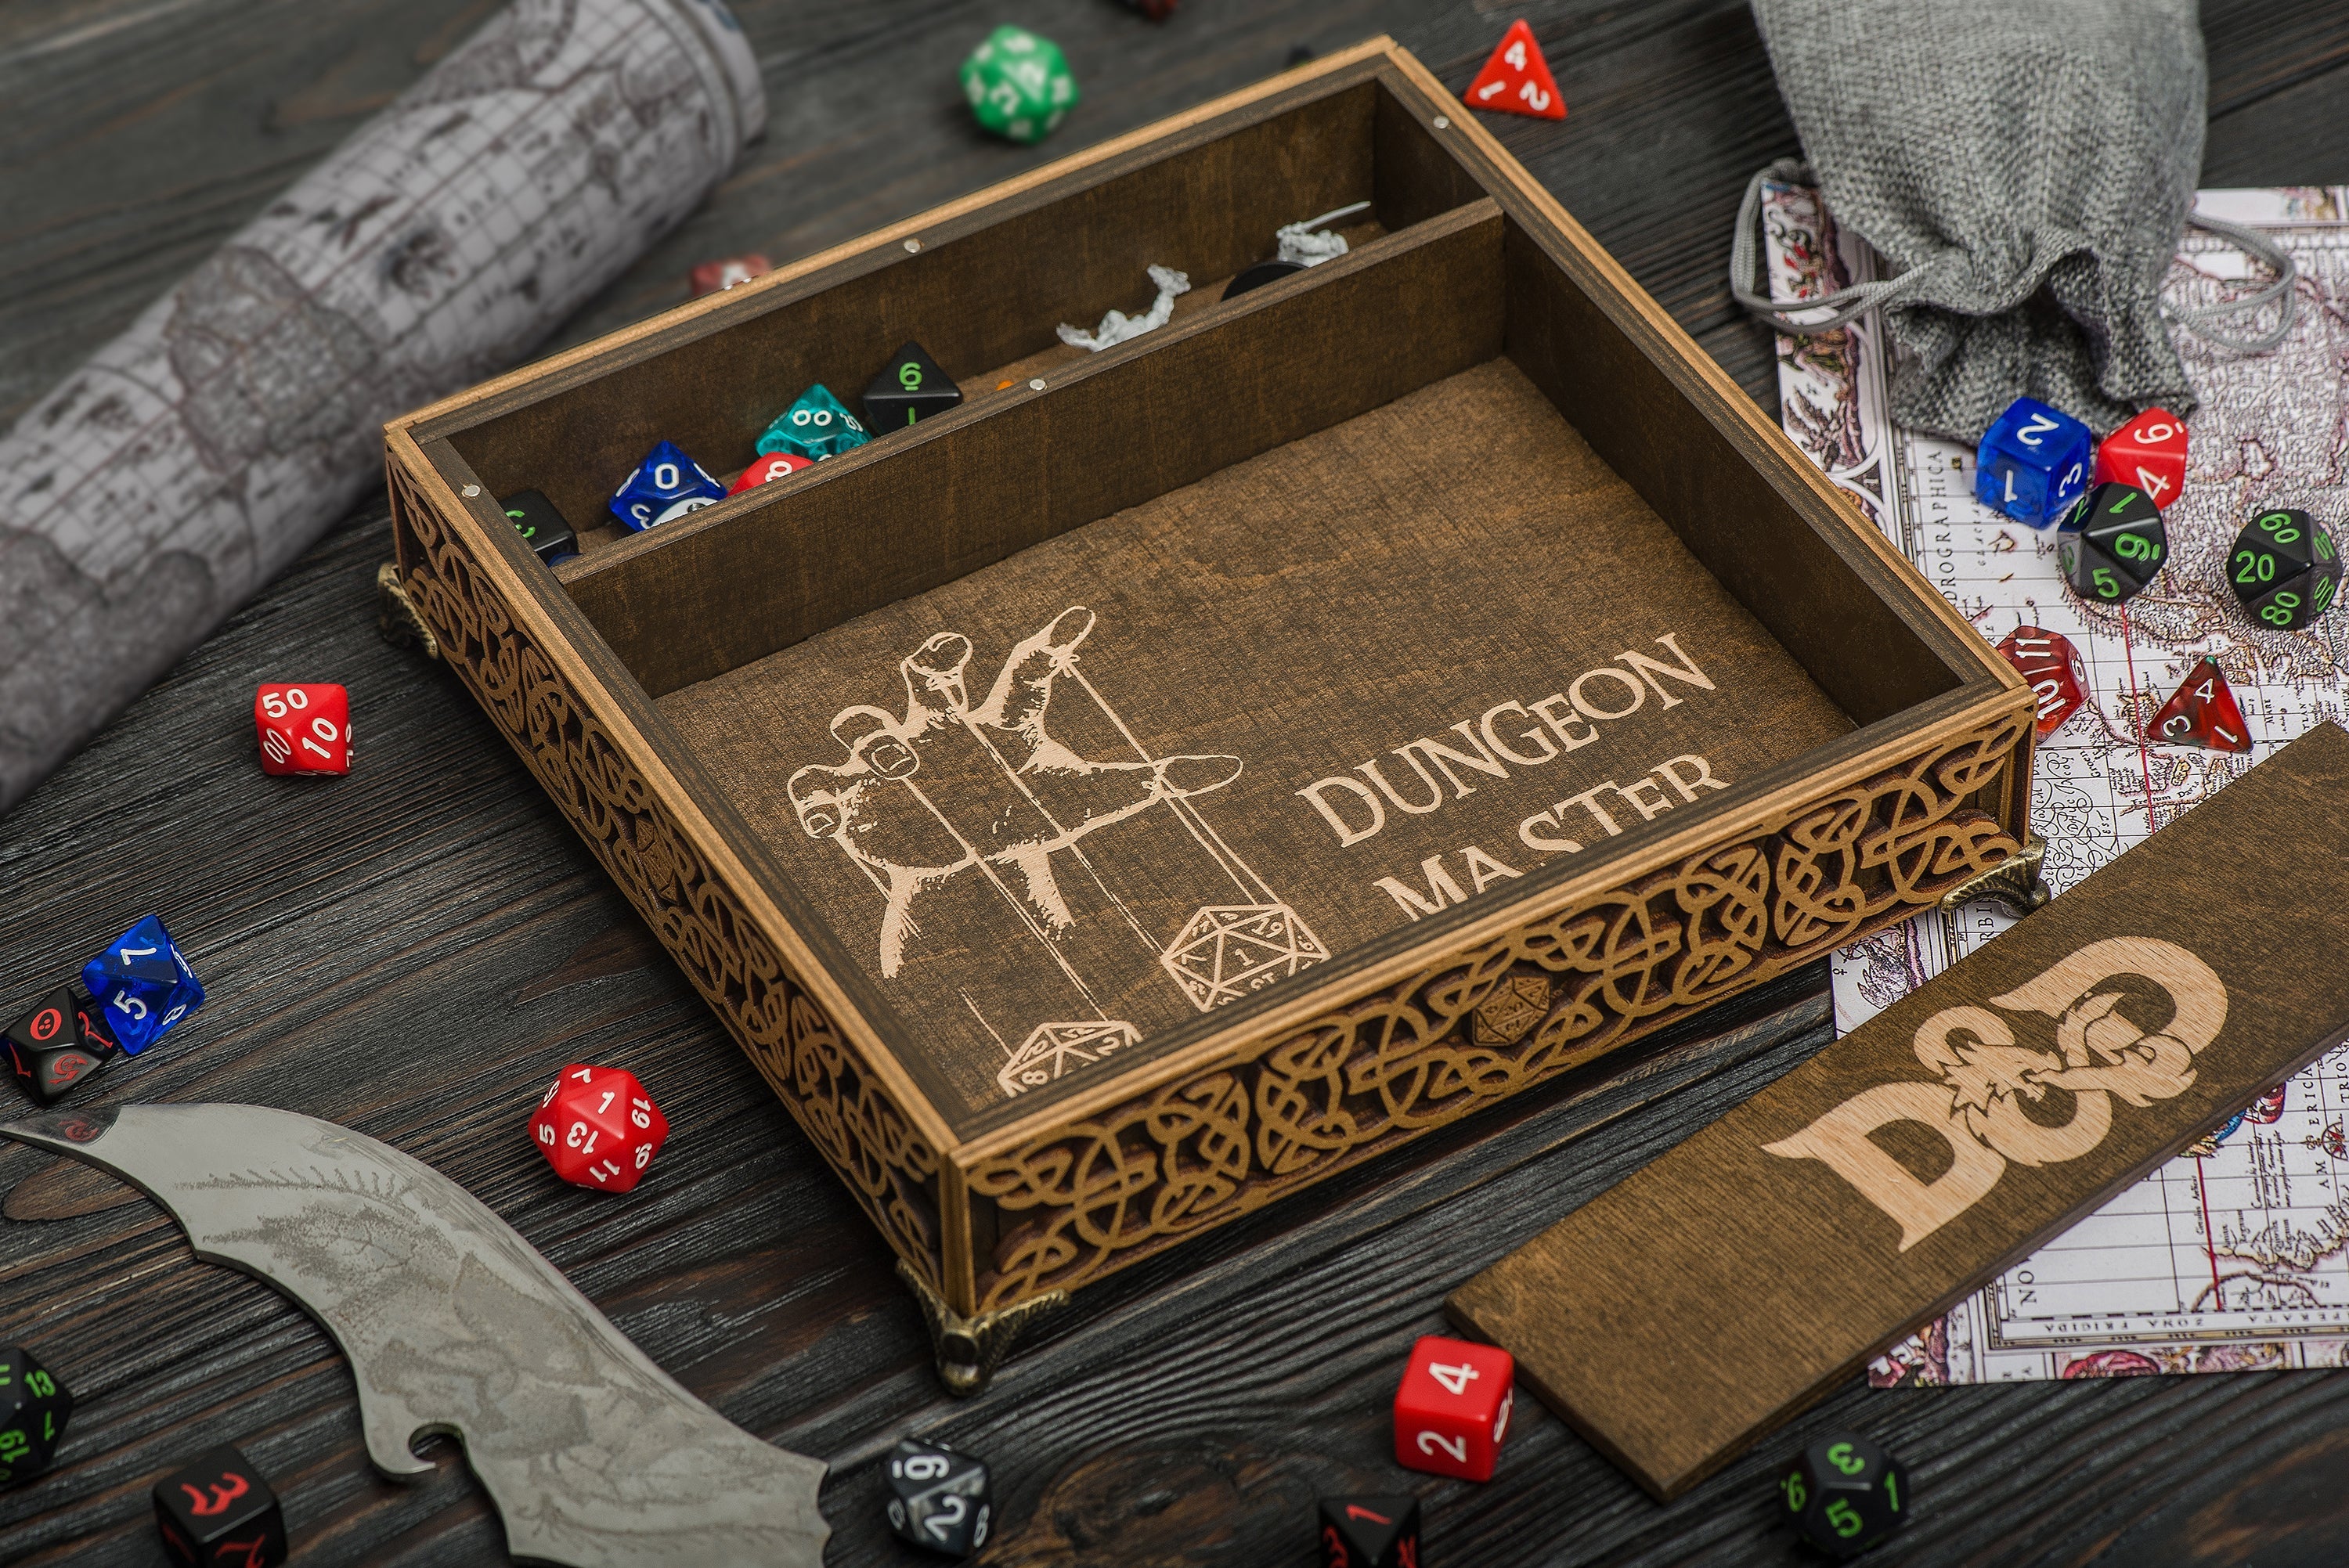 DnD Dice tray, dice storage box, Dice boxes and trays - GravisCup